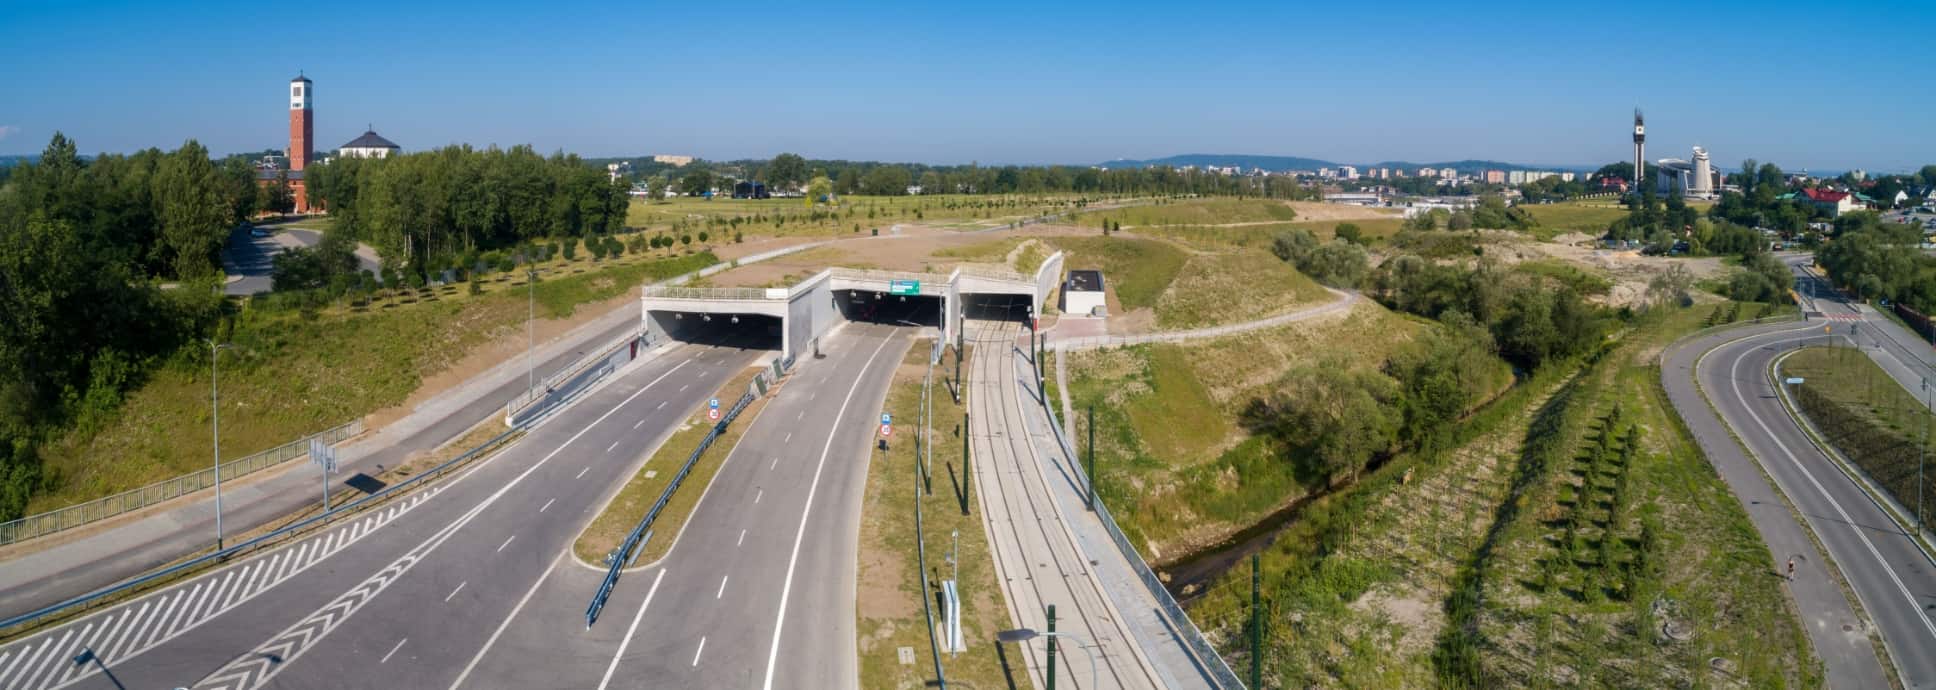 aerial view of highway tunnel